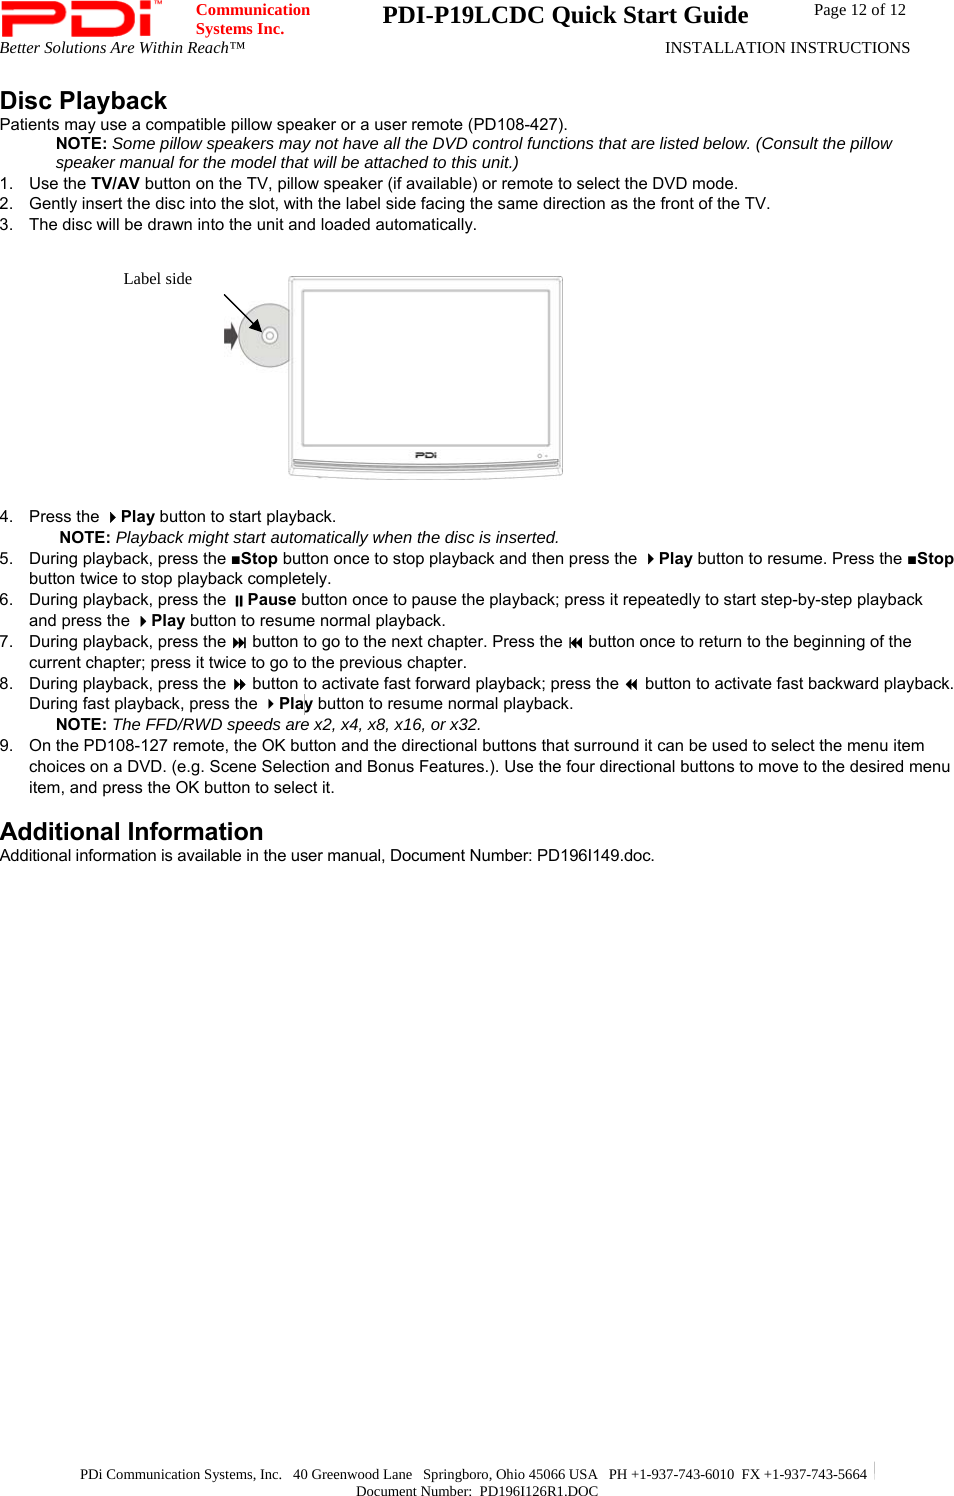  Communication  Systems Inc.  PDI-P19LCDC Quick Start Guide  Page 12 of 12 Better Solutions Are Within Reach™  INSTALLATION INSTRUCTIONS  PDi Communication Systems, Inc.   40 Greenwood Lane   Springboro, Ohio 45066 USA   PH +1-937-743-6010  FX +1-937-743-5664   Document Number:  PD196I126R1.DOC Disc Playback Patients may use a compatible pillow speaker or a user remote (PD108-427).  NOTE: Some pillow speakers may not have all the DVD control functions that are listed below. (Consult the pillow speaker manual for the model that will be attached to this unit.) 1. Use the TV/AV button on the TV, pillow speaker (if available) or remote to select the DVD mode. 2.  Gently insert the disc into the slot, with the label side facing the same direction as the front of the TV.  3.  The disc will be drawn into the unit and loaded automatically.          4. Press the Play button to start playback. NOTE: Playback might start automatically when the disc is inserted. 5.  During playback, press the ■Stop button once to stop playback and then press the Play button to resume. Press the ■Stop button twice to stop playback completely. 6.  During playback, press the Pause button once to pause the playback; press it repeatedly to start step-by-step playback and press the Play button to resume normal playback. 7.  During playback, press the  button to go to the next chapter. Press the  button once to return to the beginning of the current chapter; press it twice to go to the previous chapter. 8.  During playback, press the  button to activate fast forward playback; press the  button to activate fast backward playback. During fast playback, press the Play button to resume normal playback. NOTE: The FFD/RWD speeds are x2, x4, x8, x16, or x32. 9.  On the PD108-127 remote, the OK button and the directional buttons that surround it can be used to select the menu item choices on a DVD. (e.g. Scene Selection and Bonus Features.). Use the four directional buttons to move to the desired menu item, and press the OK button to select it.  Additional Information Additional information is available in the user manual, Document Number: PD196I149.doc.   Label side 